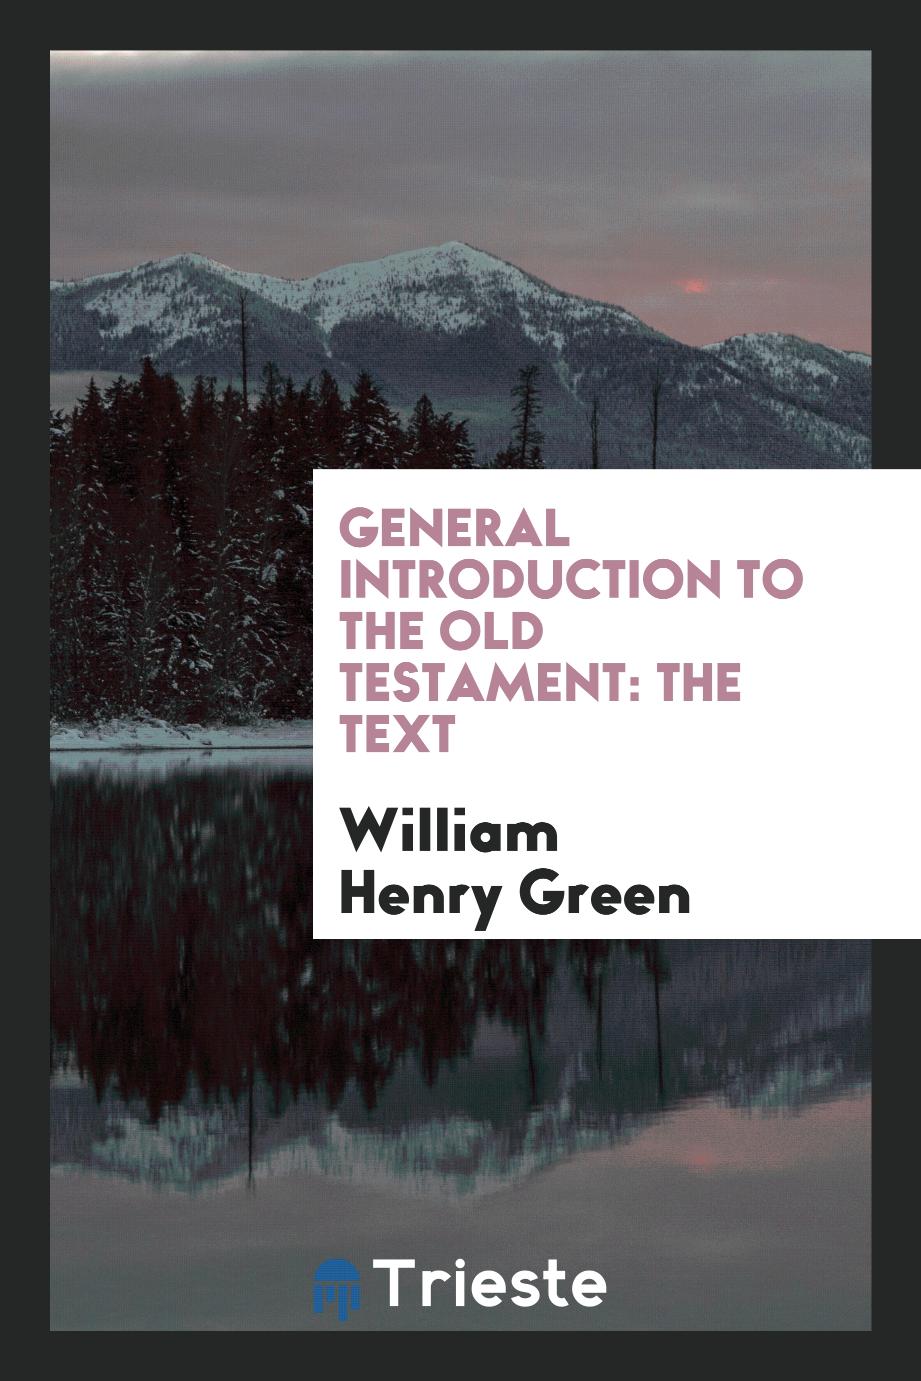 General Introduction to the Old Testament: The Text